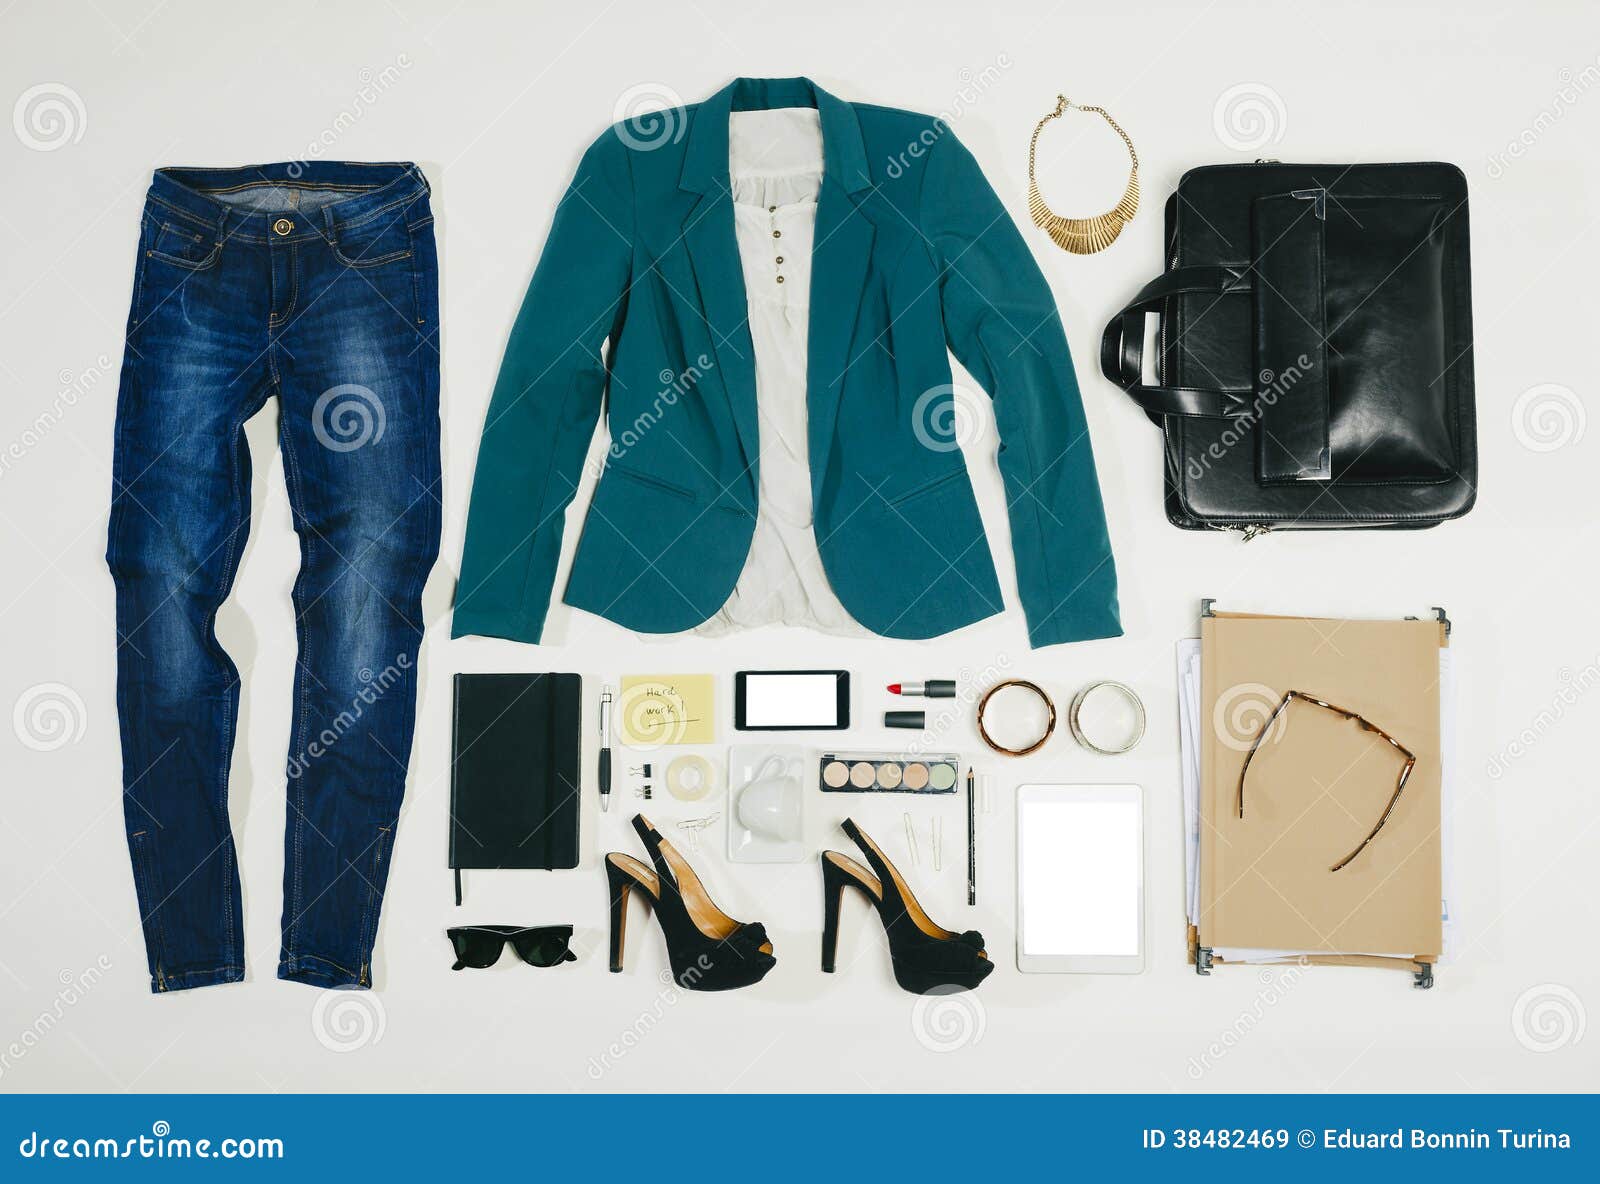 Overhead of Essentials Business Woman. Stock Image - Image of fashion ...